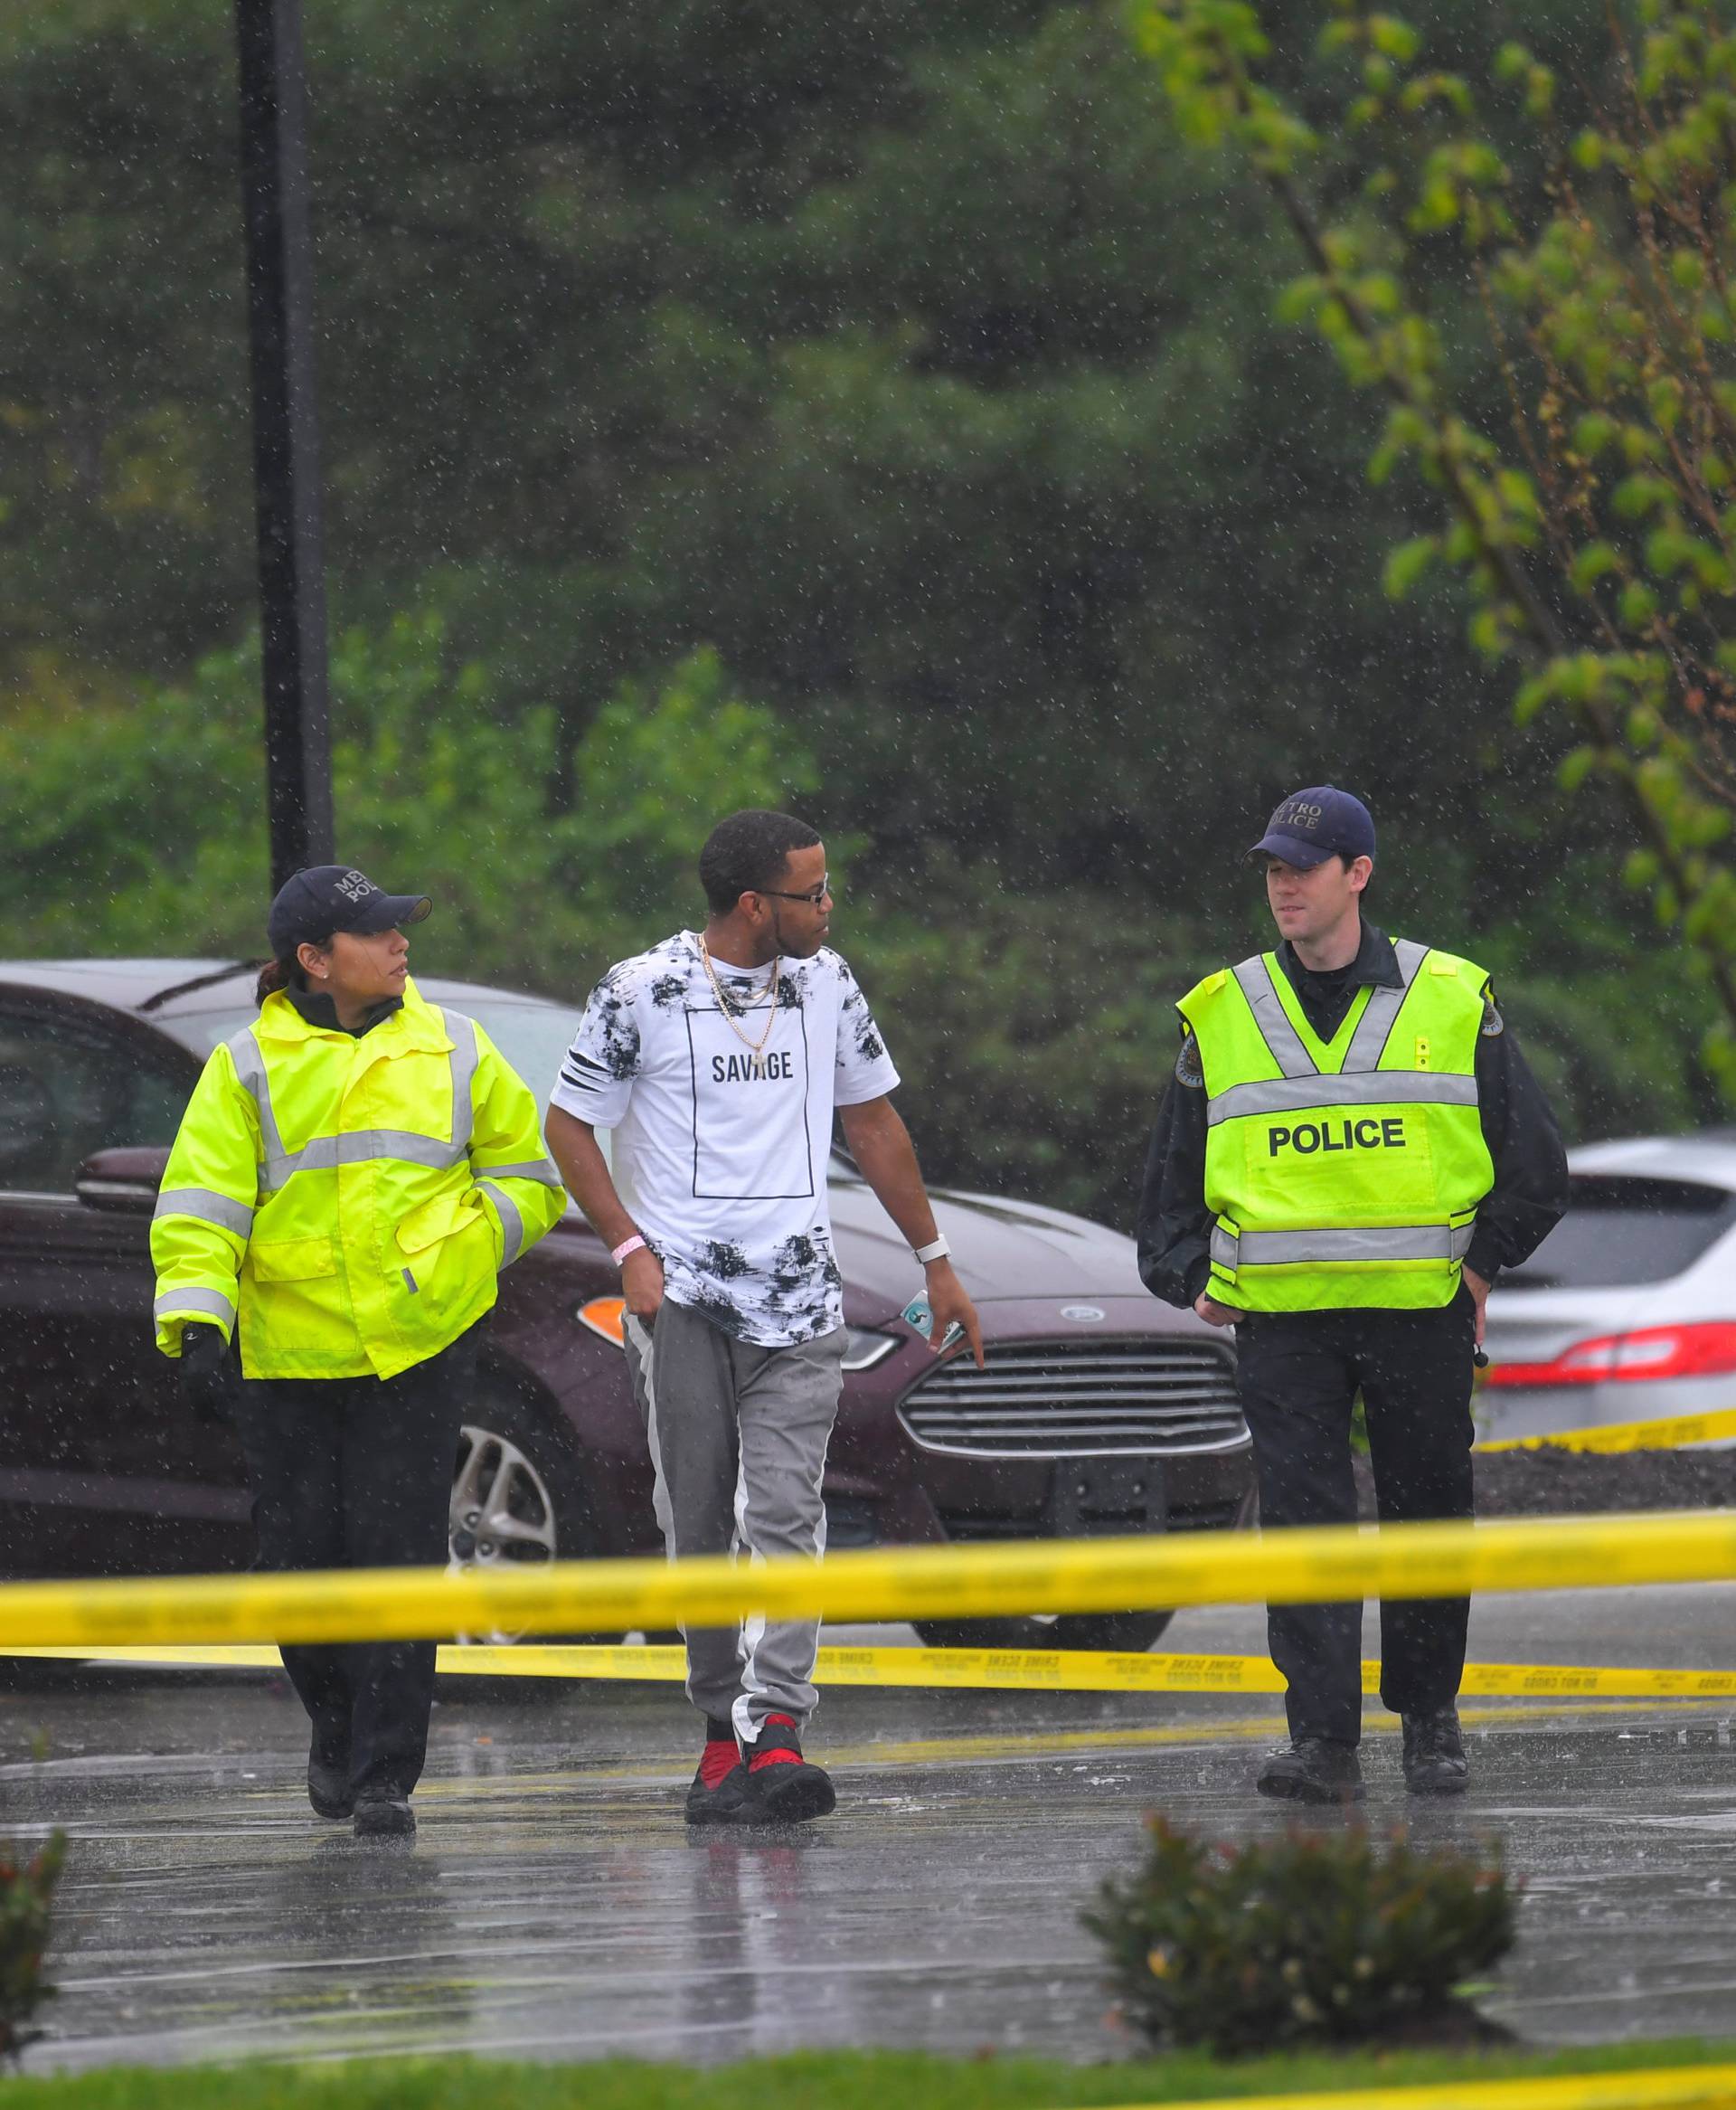 Metro Davidson County Police escort a man to his car at the scene of a fatal shooting at a Waffle House restaurant near Nashville, Tennessee